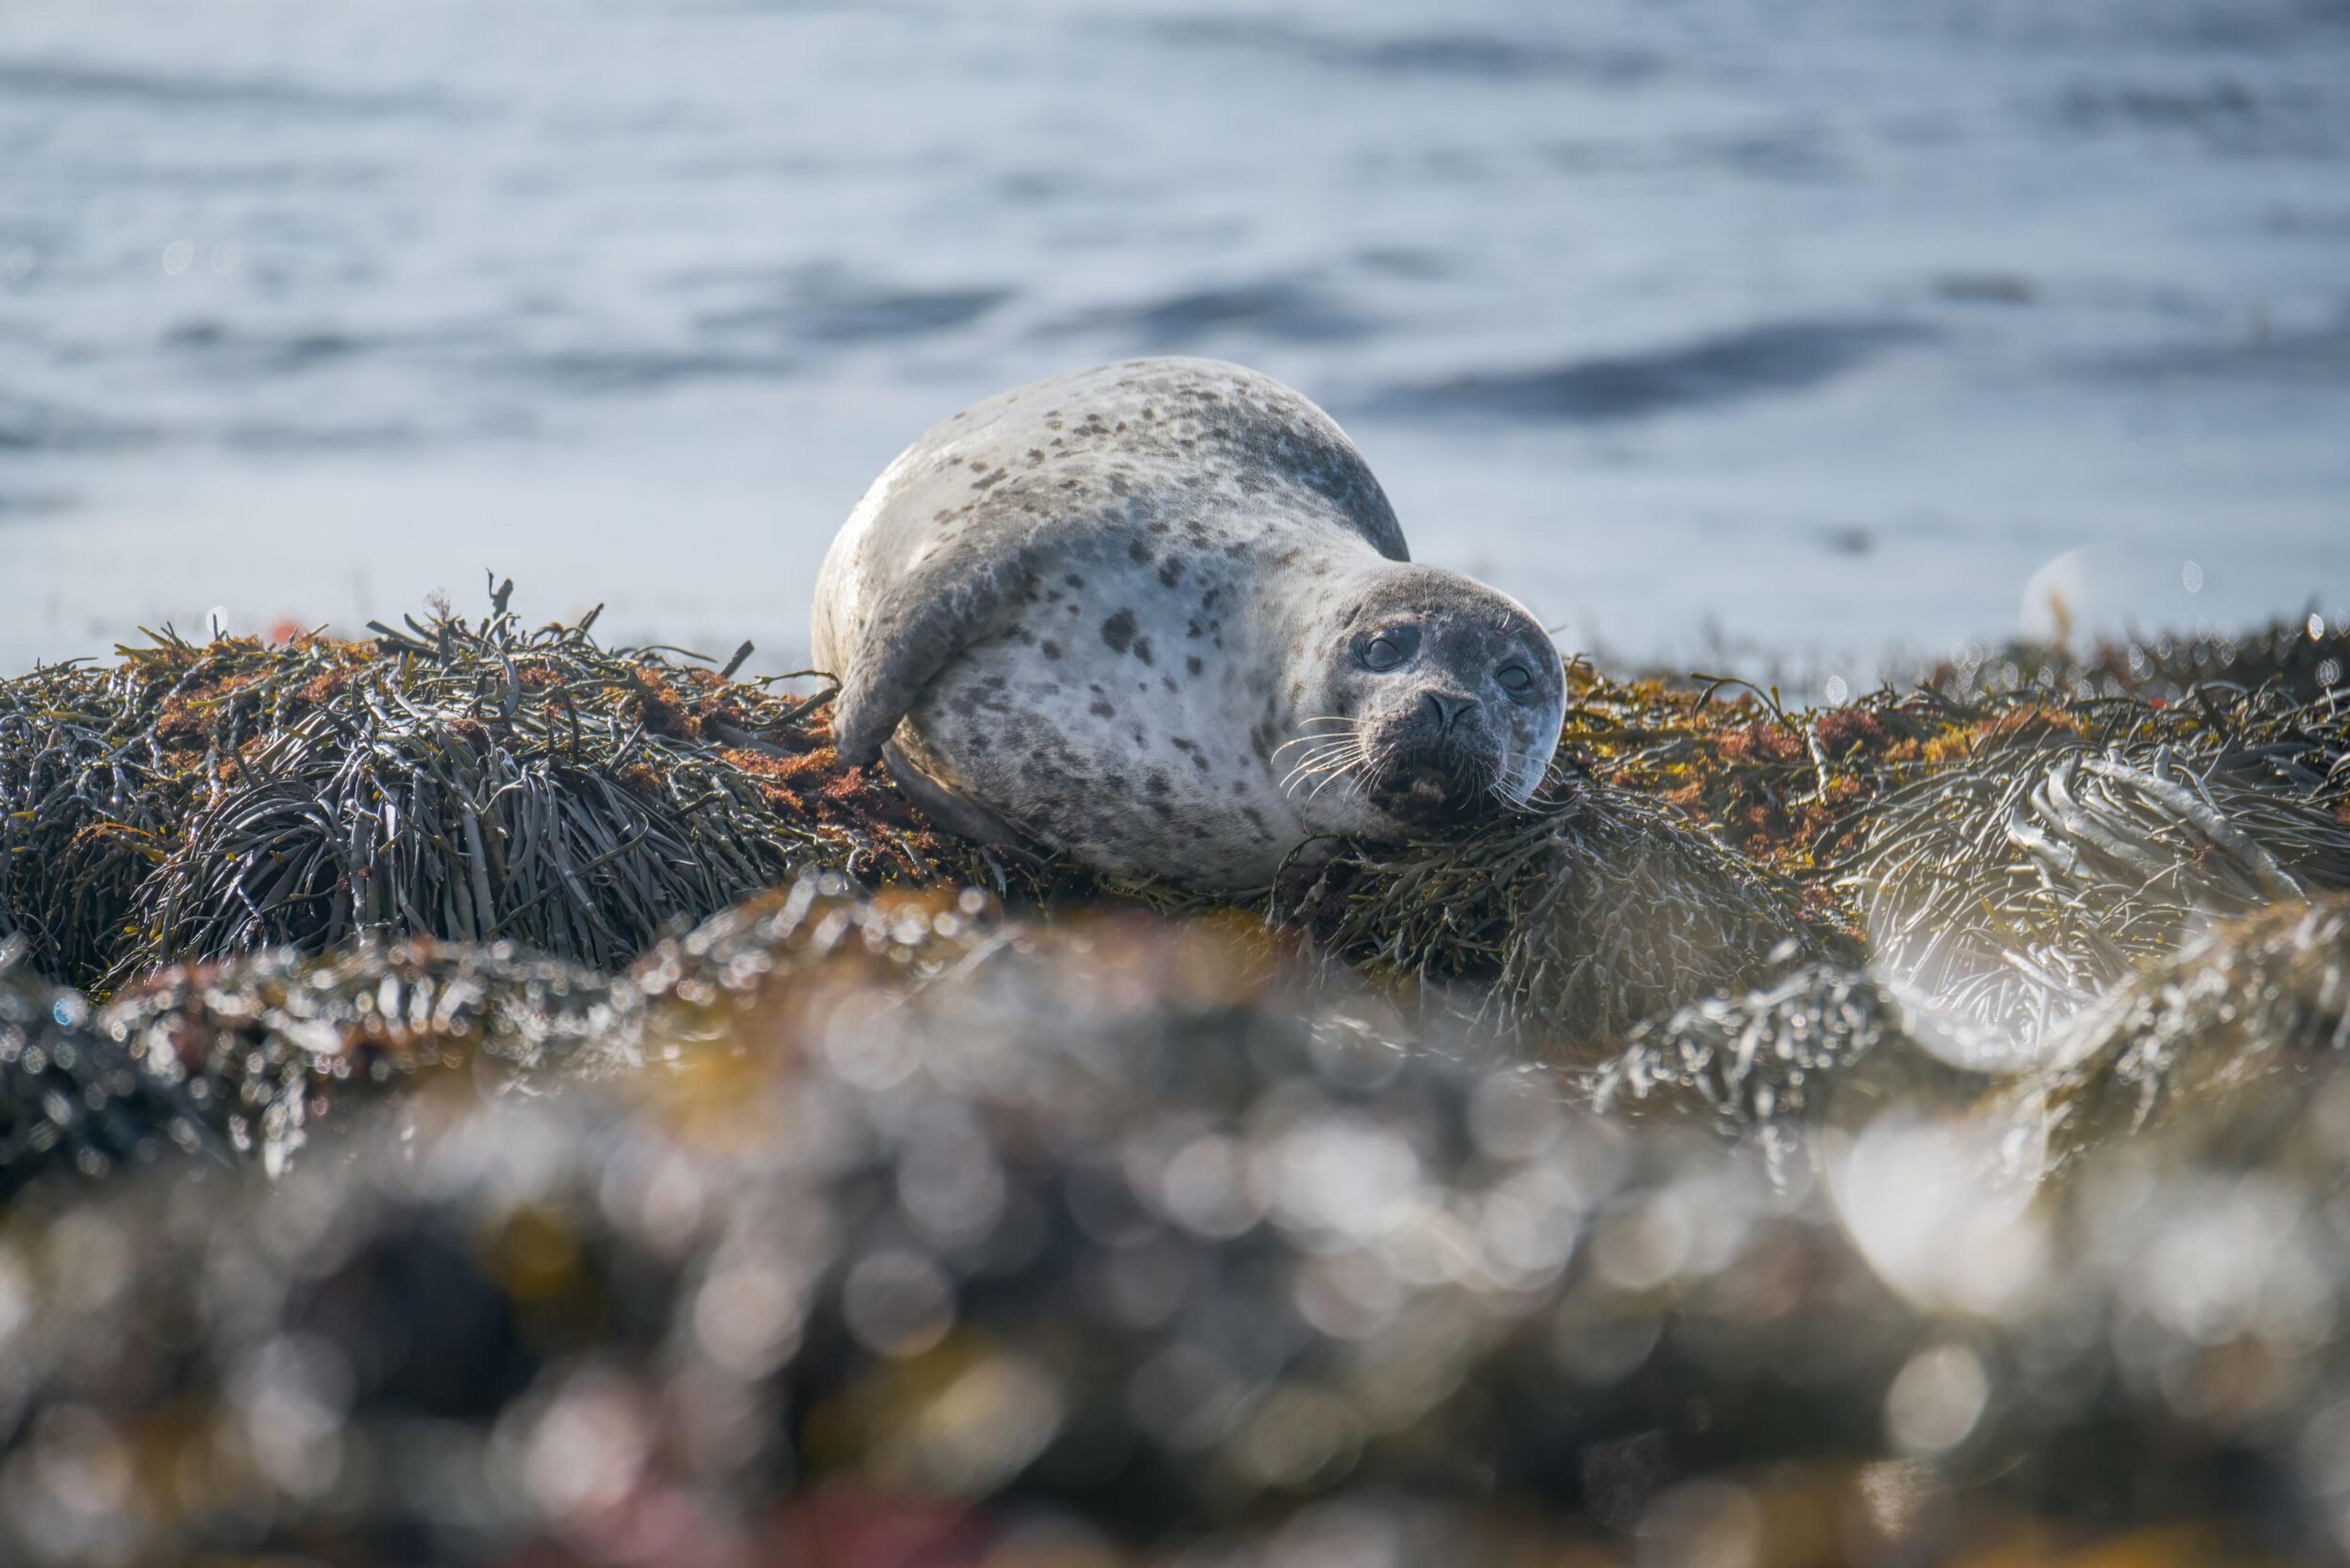 A seal lounges on a seaweed-covered rock near the water's edge, basking in the sunlight with its gaze directed towards the viewer.